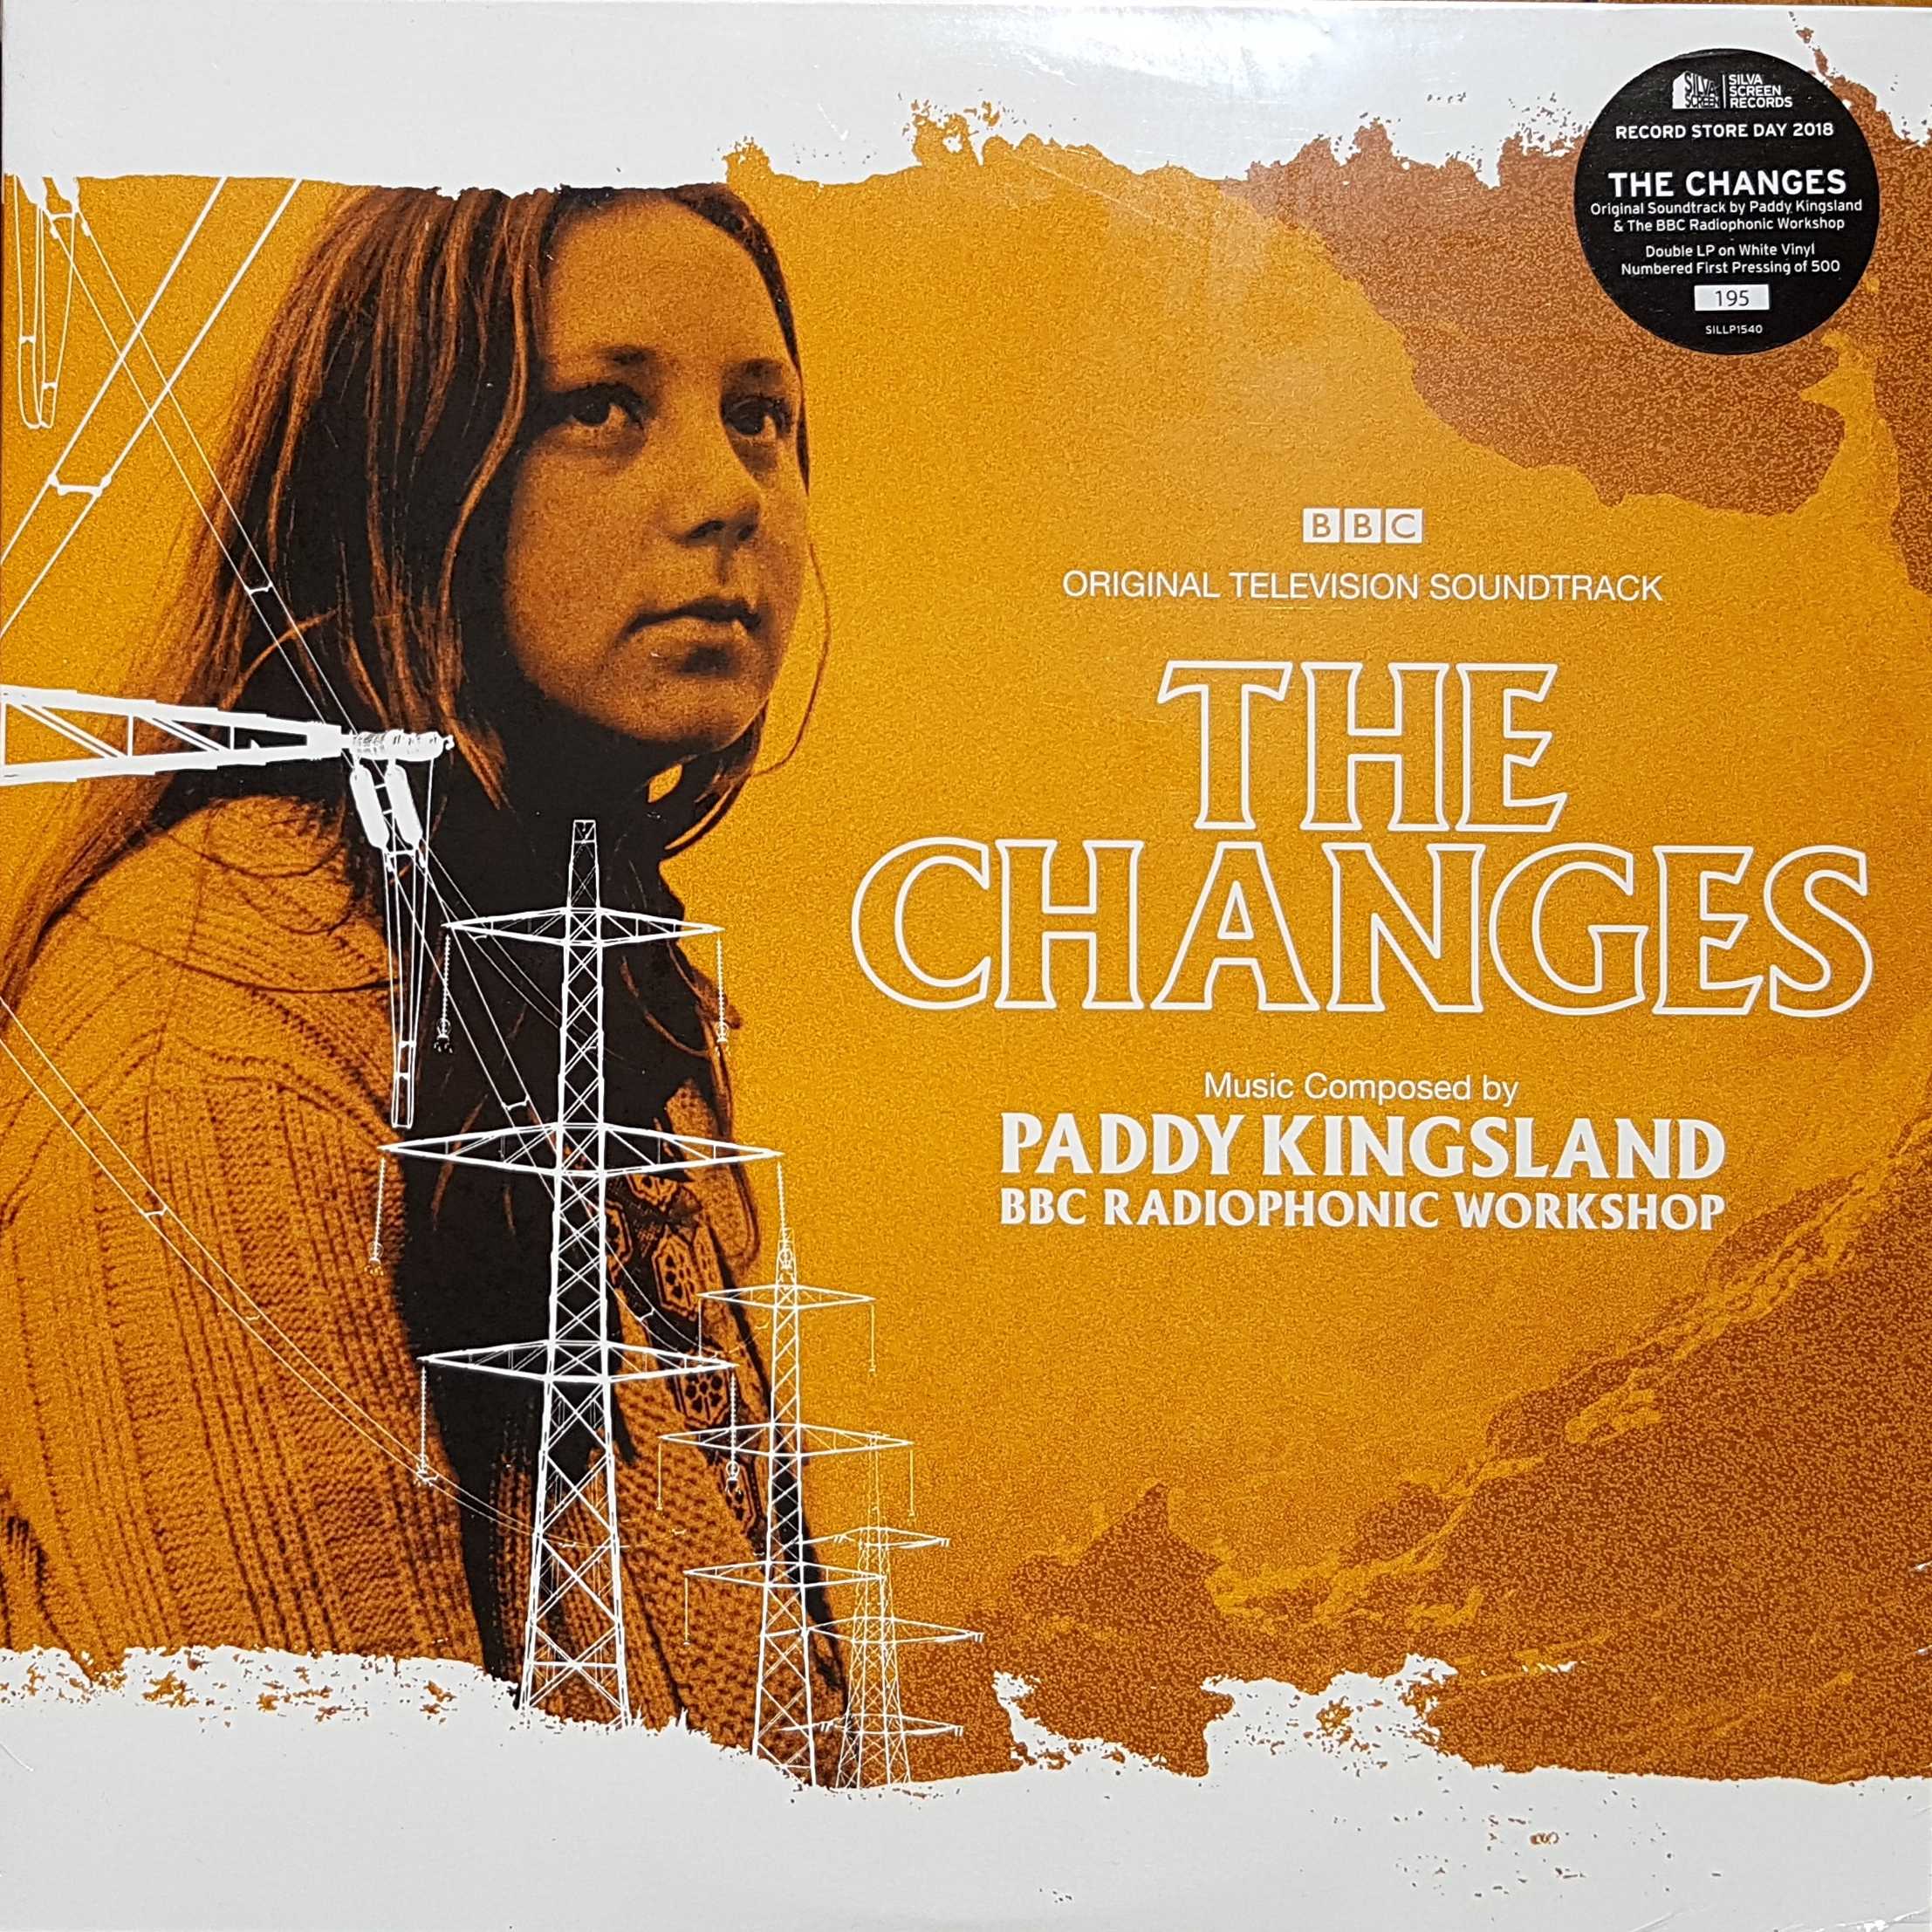 Picture of SILLP 1540 The changes - Record Store Day 2018 by artist Paddy Kingsland / BBC Radiophonic Workshop from the BBC records and Tapes library